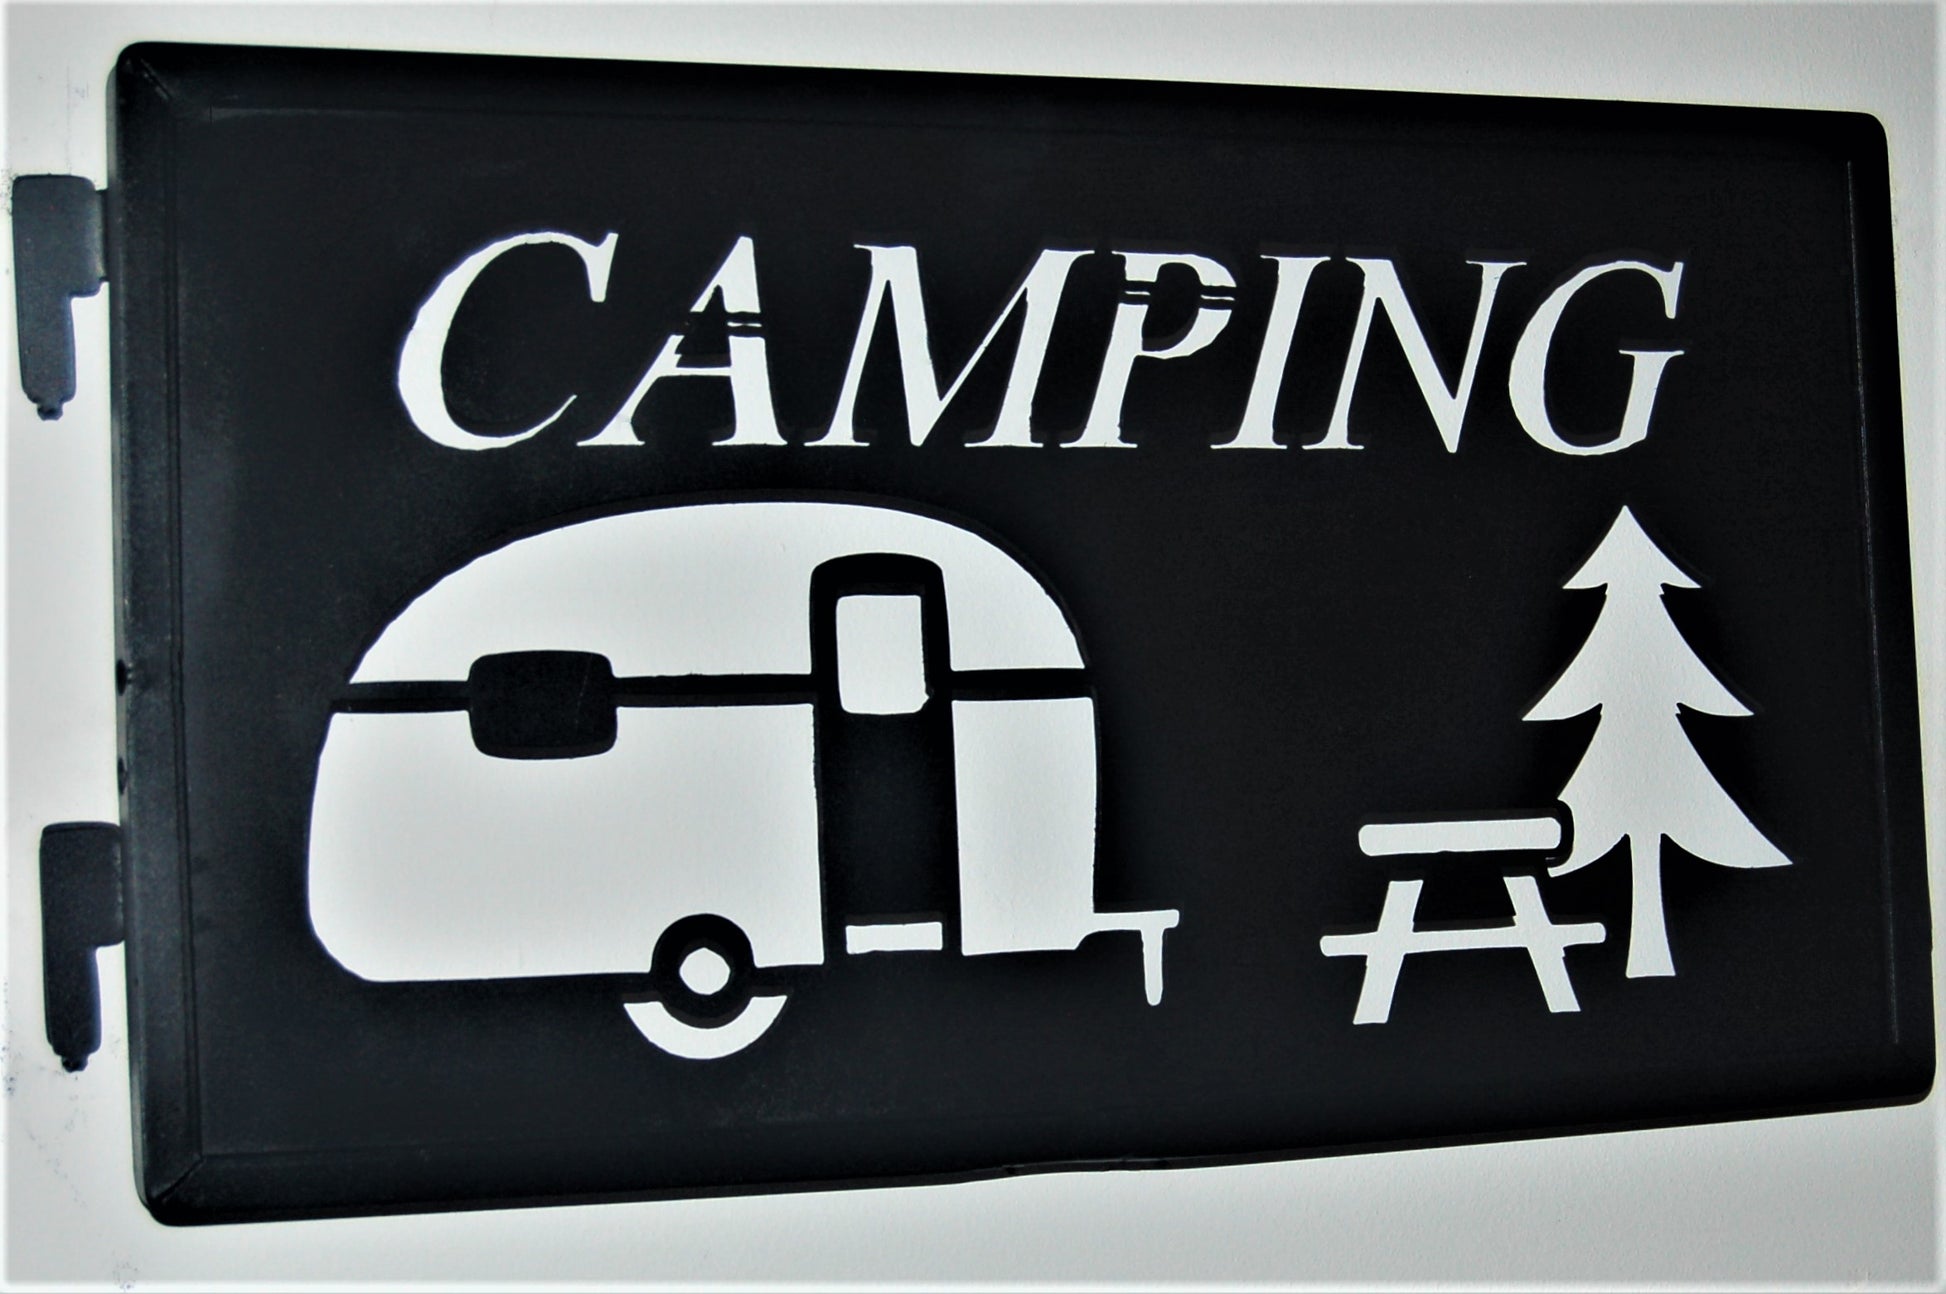 black metal Camping inspiring panel featuring camper, picnic table and pine tree